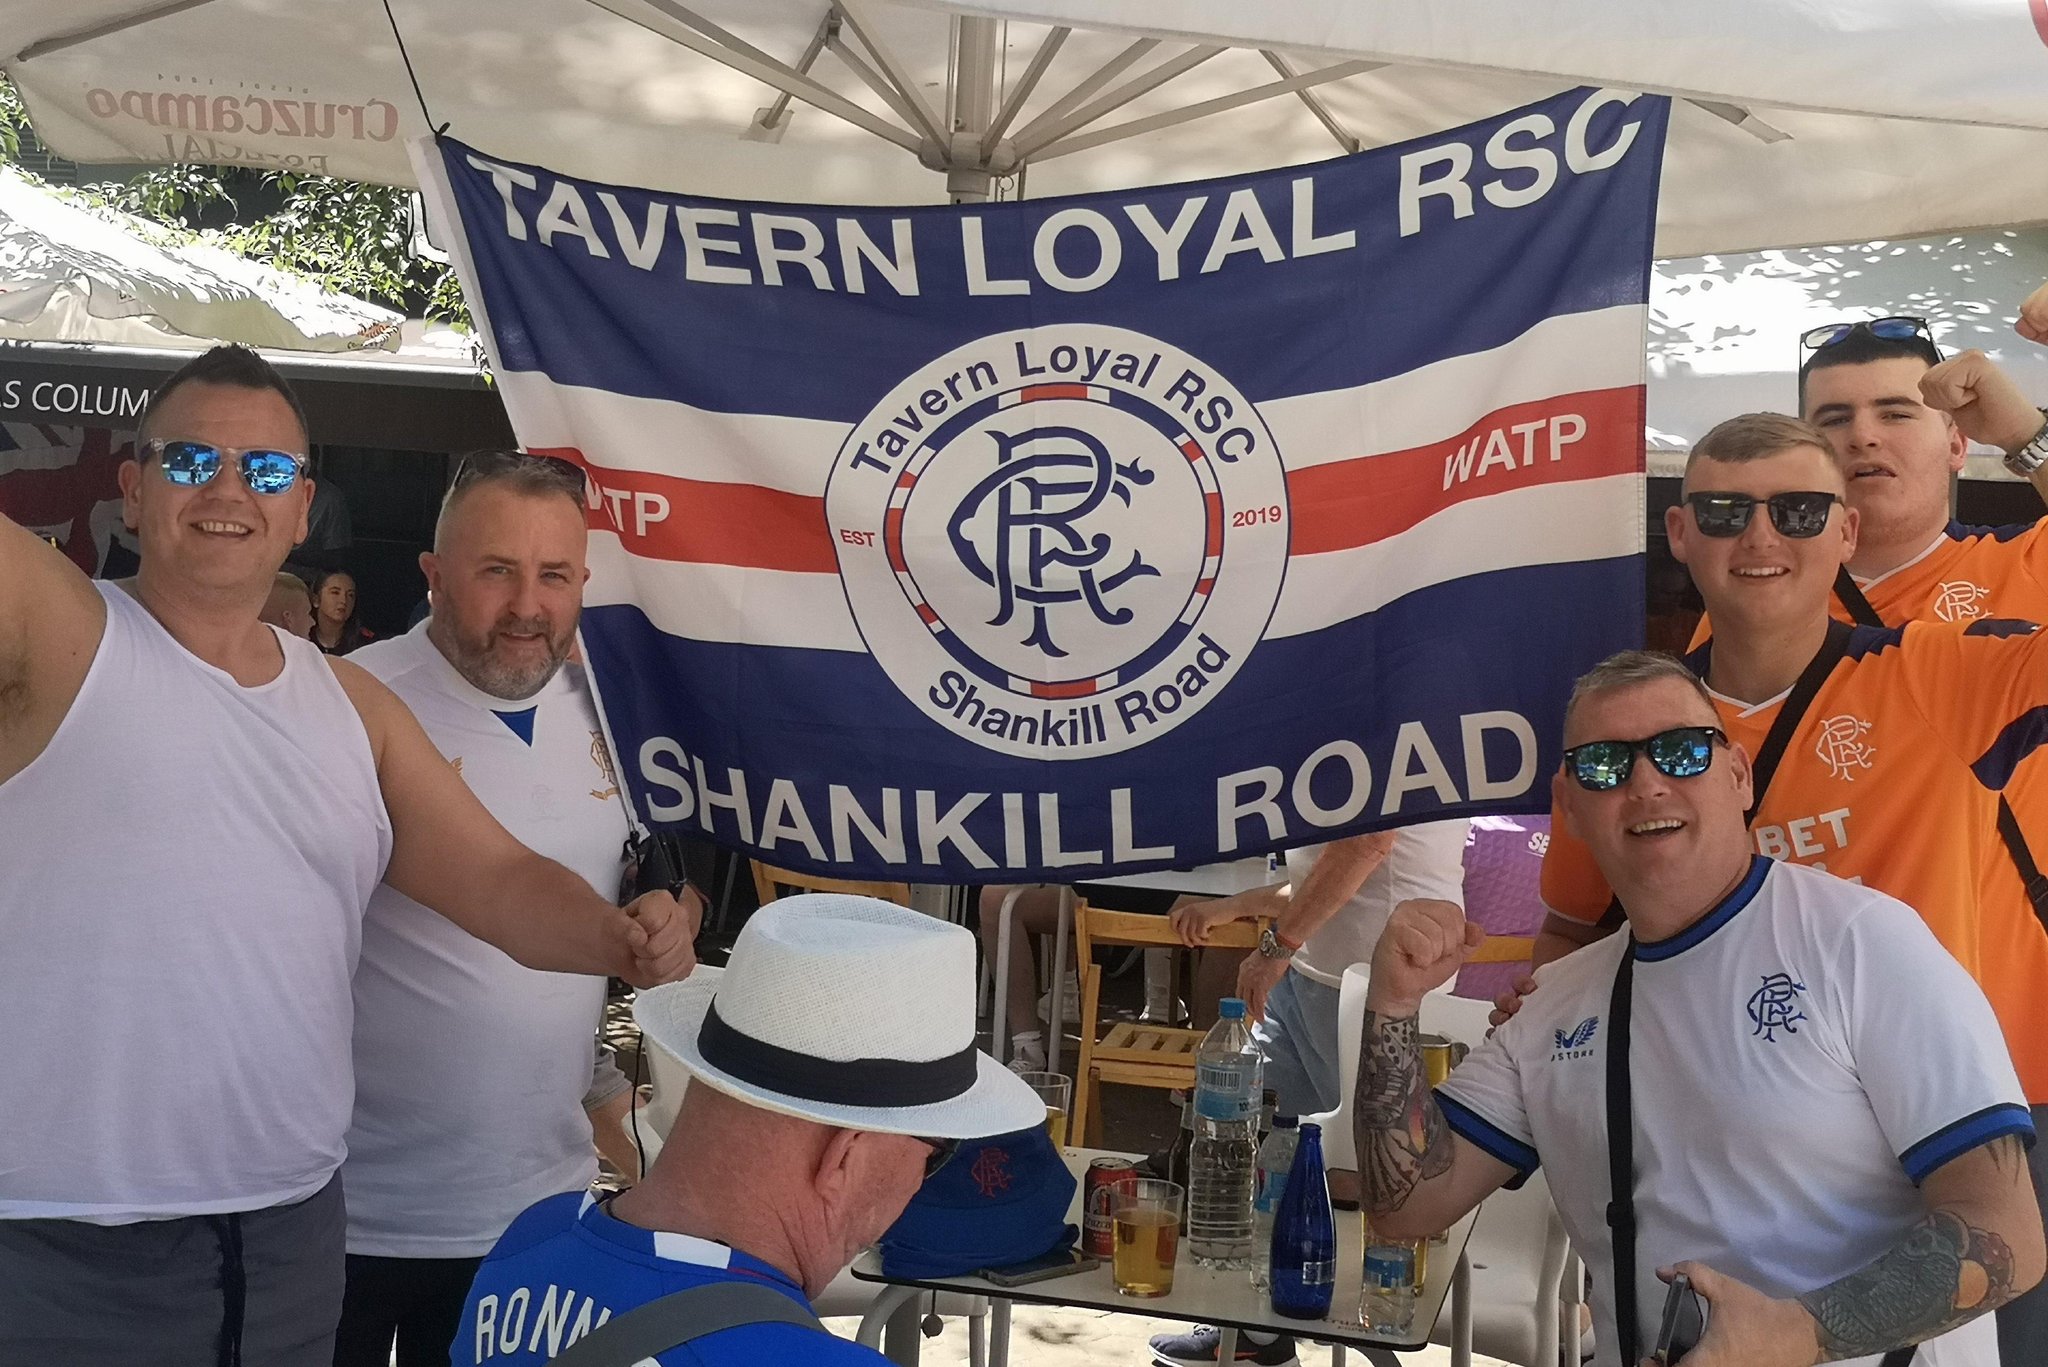 Rangers fan from Belfast in Seville: 'I've never known anything like it'